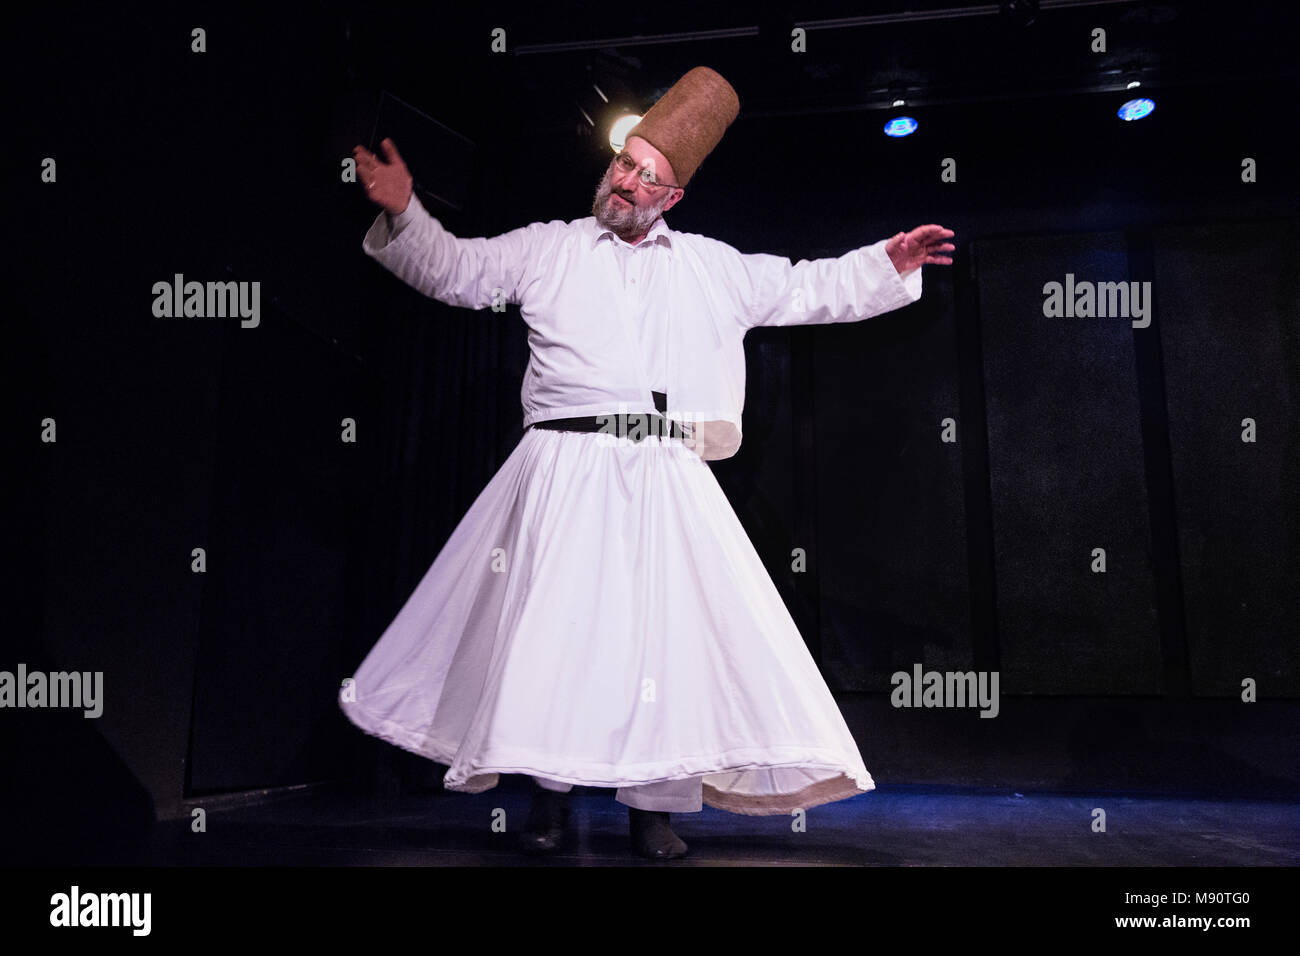 Sufi dervish Omar whirling in Paris, France. Stock Photo